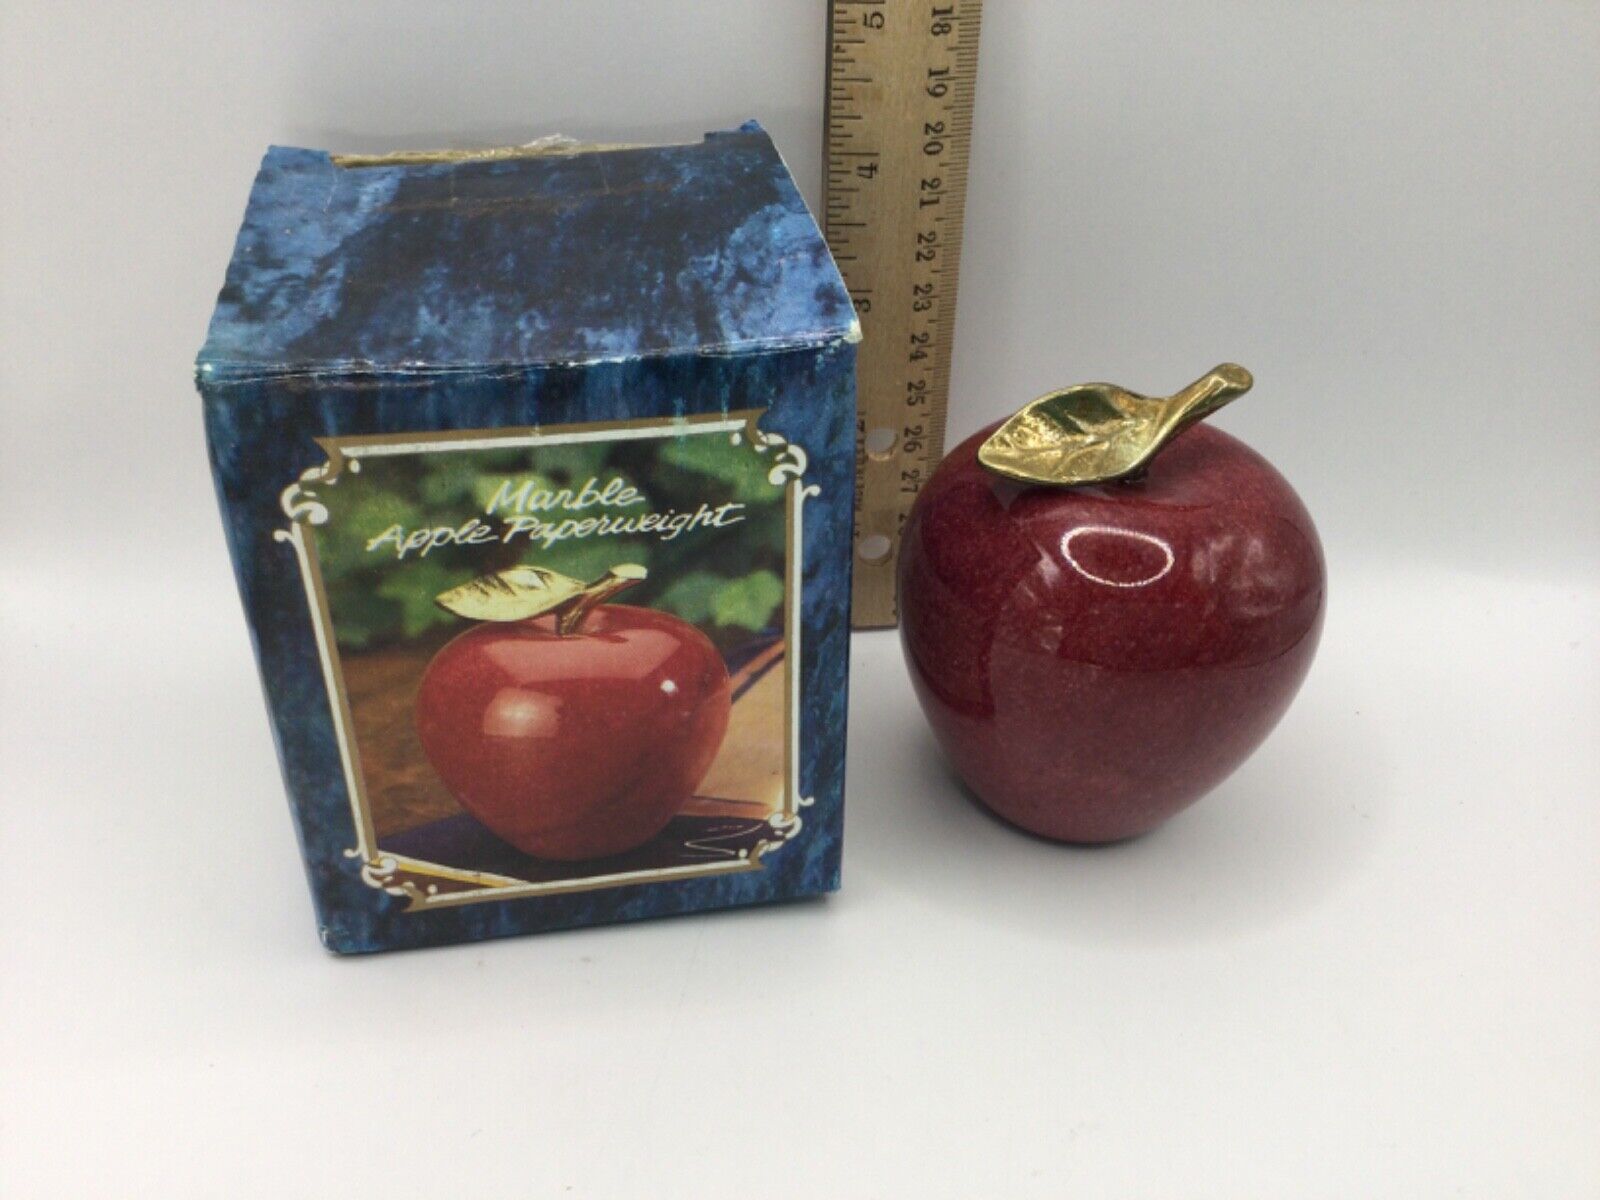 Marble Red Apple Paperweight With Original Box 1.7 lb Vintage ABC Item #37211